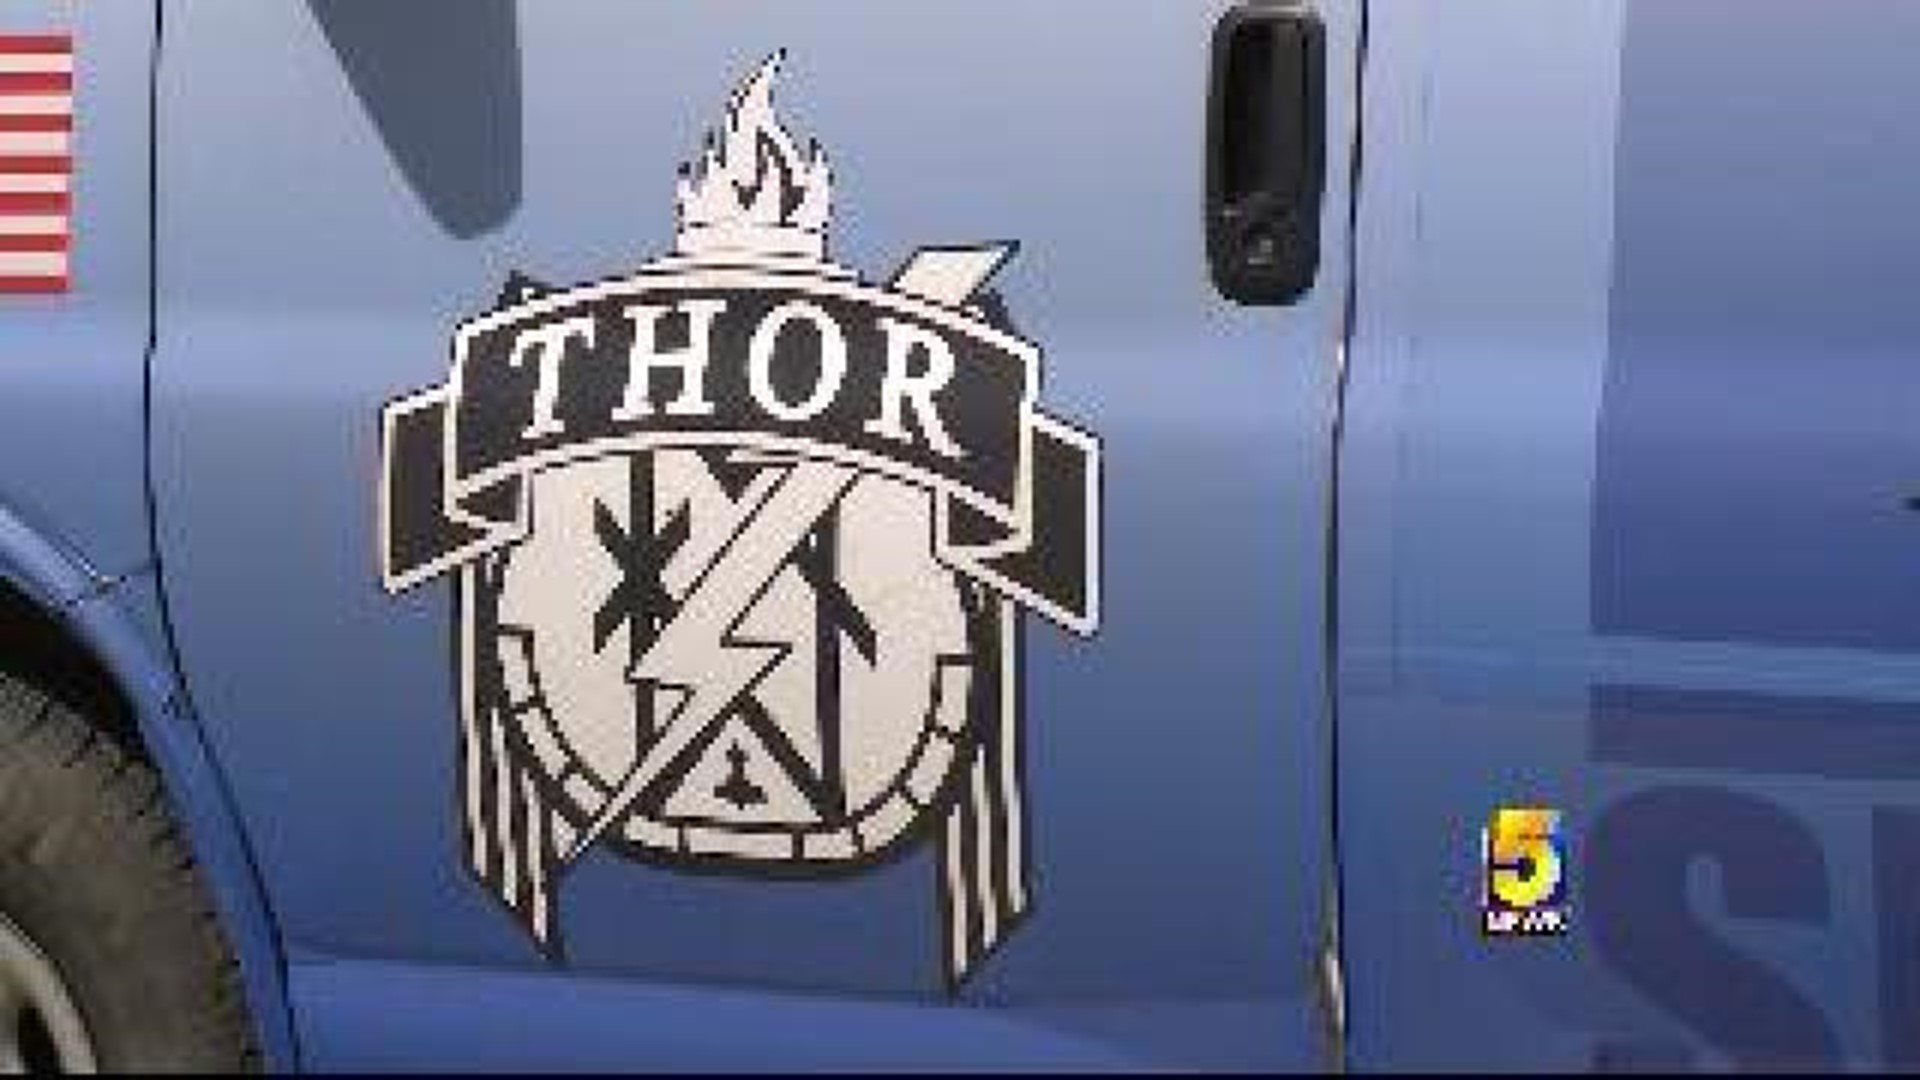 Residents Near Thor Want More Regulations